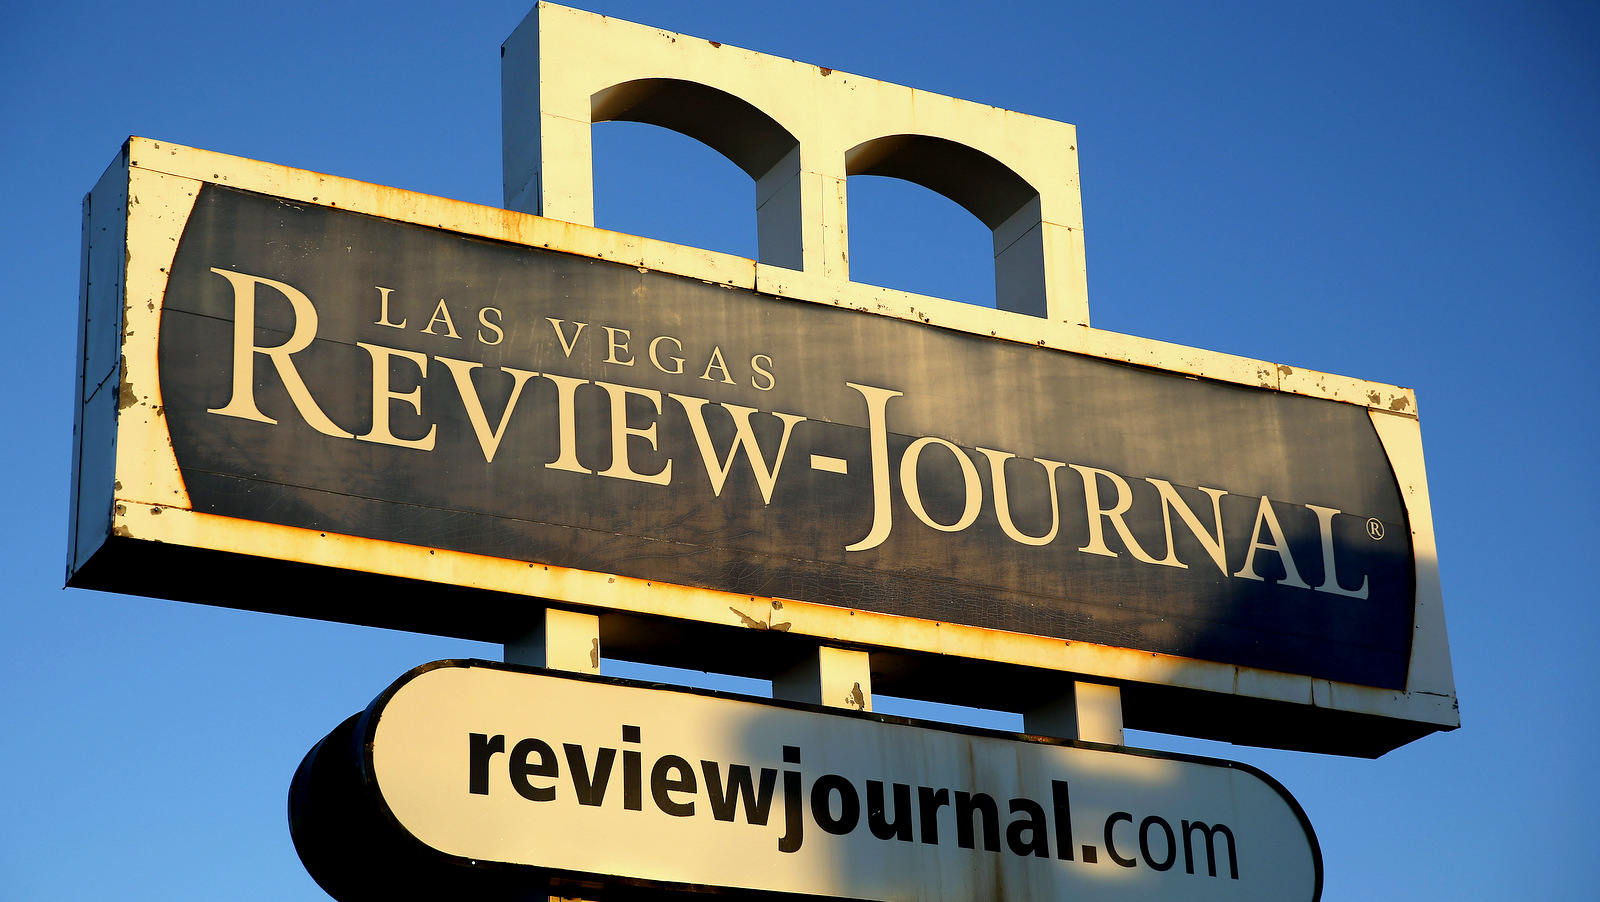 A sign for the Las Vegas Review-Journal is seen Thursday, Dec. 17, 2015, in Las Vegas. The family of billionaire casino mogul and GOP kingmaker Sheldon Adelson confirmed in a statement to the Las Vegas Review-Journal that they are the new owners of Nevada's largest newspaper, ending a week of speculation and demands by staff and politicians to know the identity of the new boss. (AP Photo/John Locher)